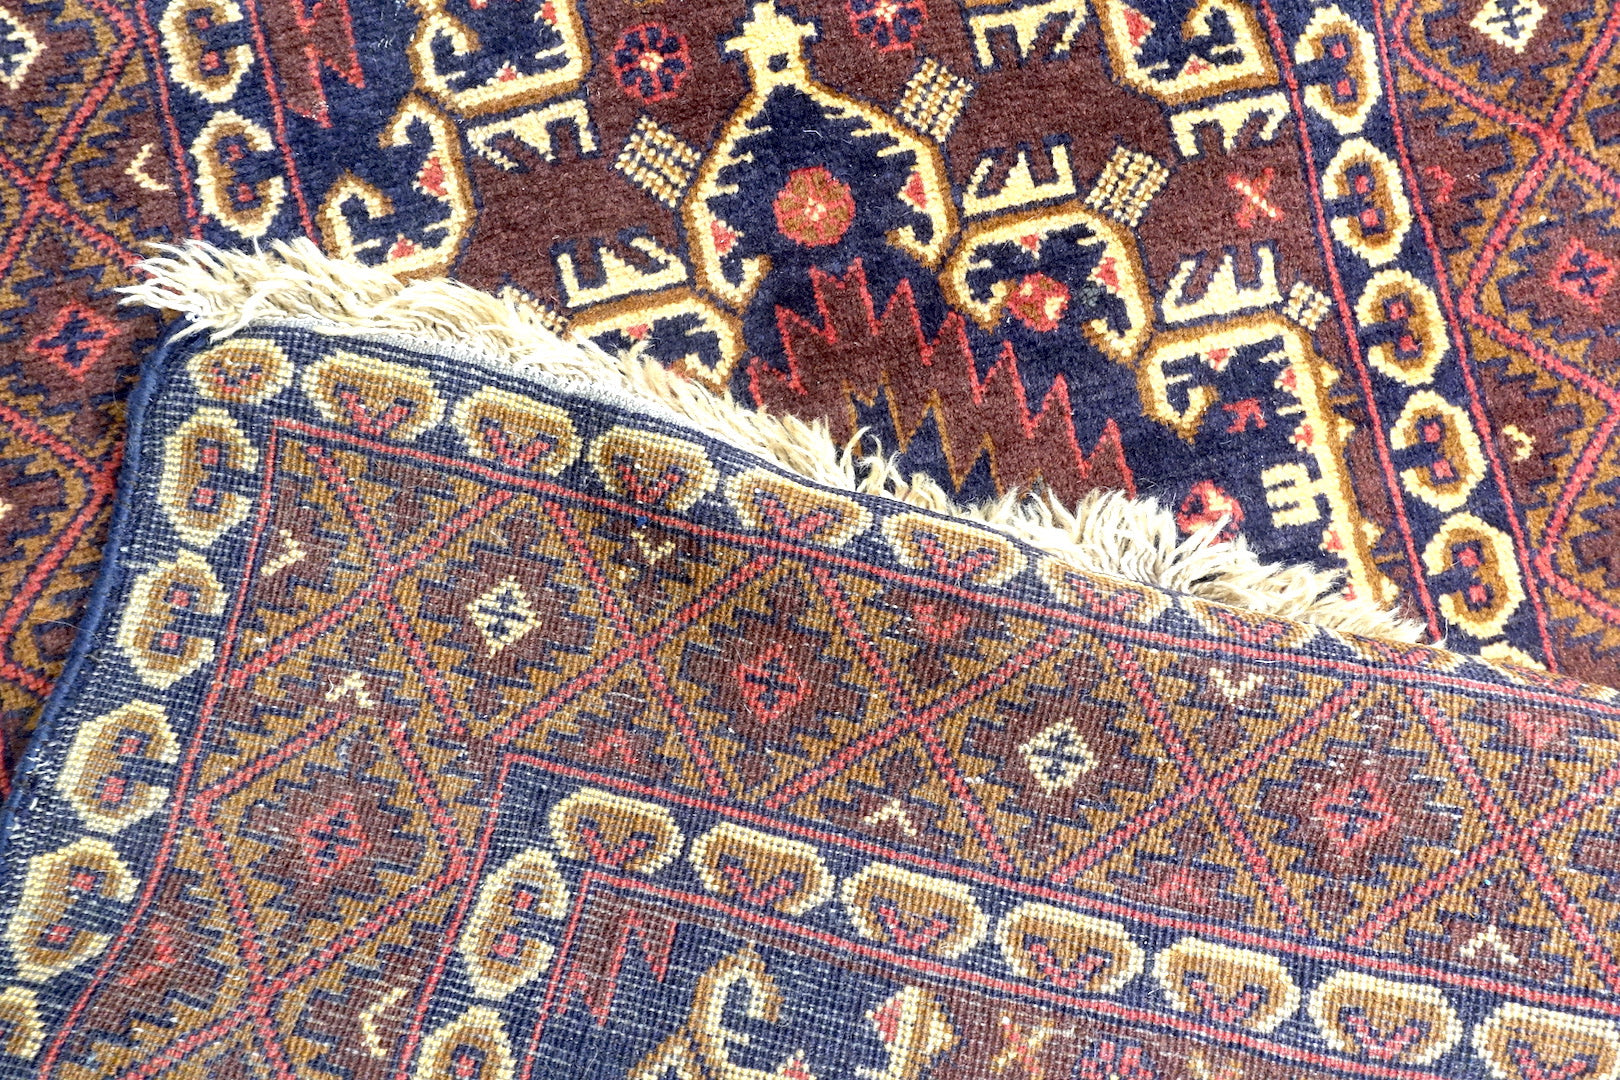 A 3 by 9.5 feet baluchi wool rug, the colours used on the rug are red,brown,beige and blue.